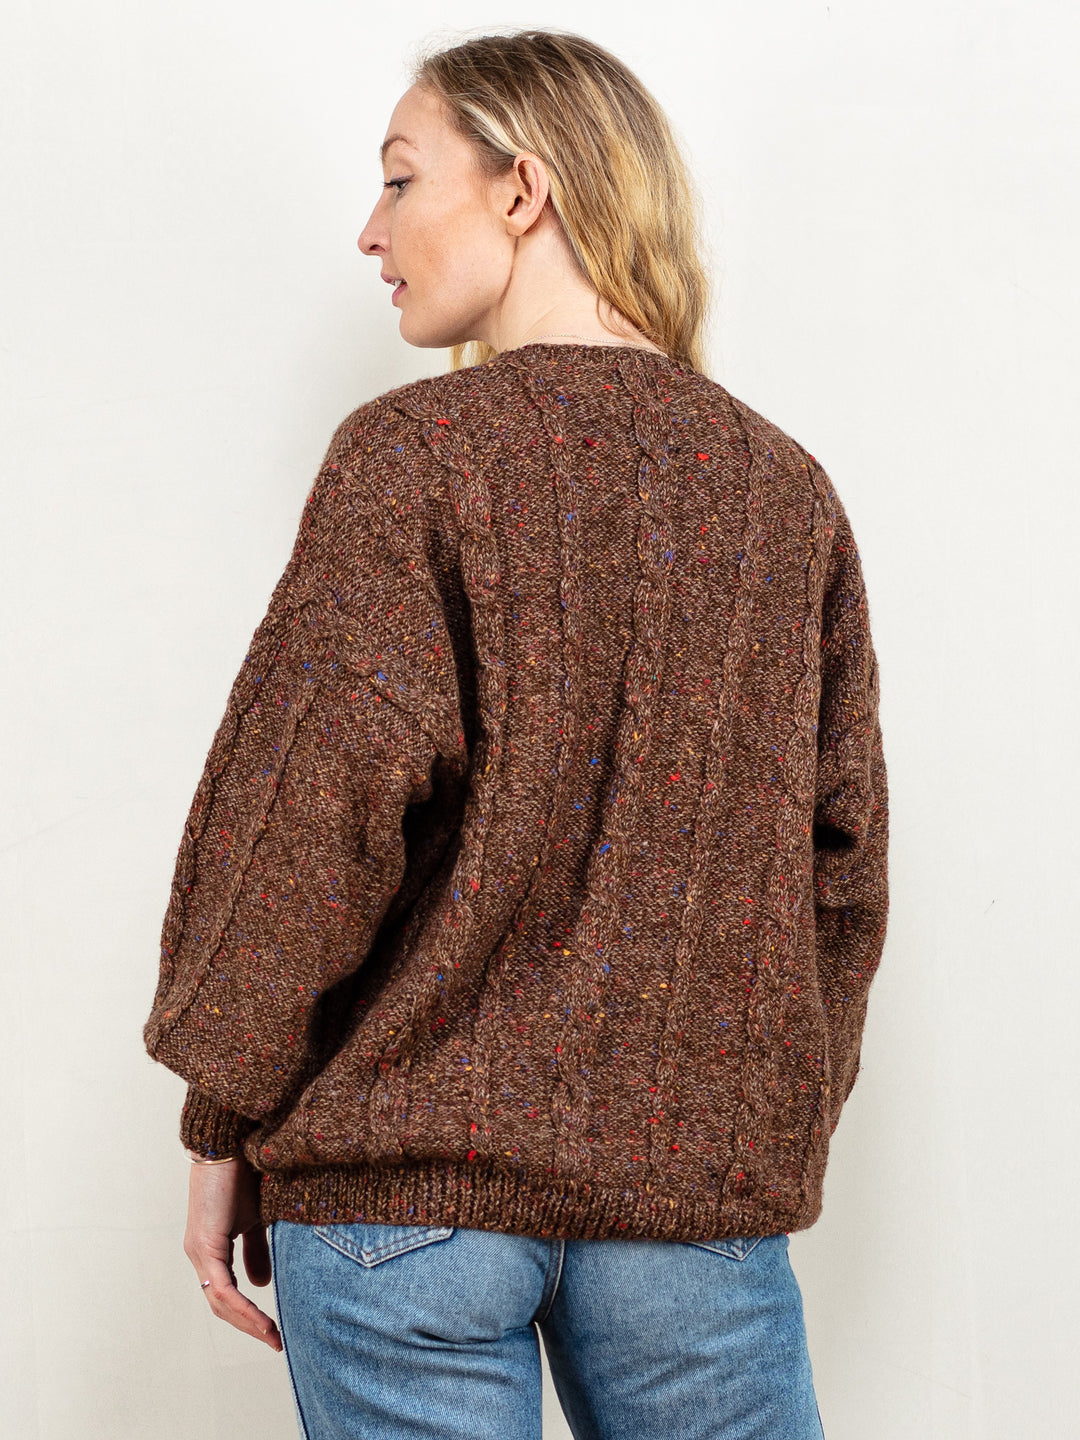 This is a vintage 80's/ 90's hand-knit sweater in brown. Seems to be made of an acrylic blend, because of the soft touch.